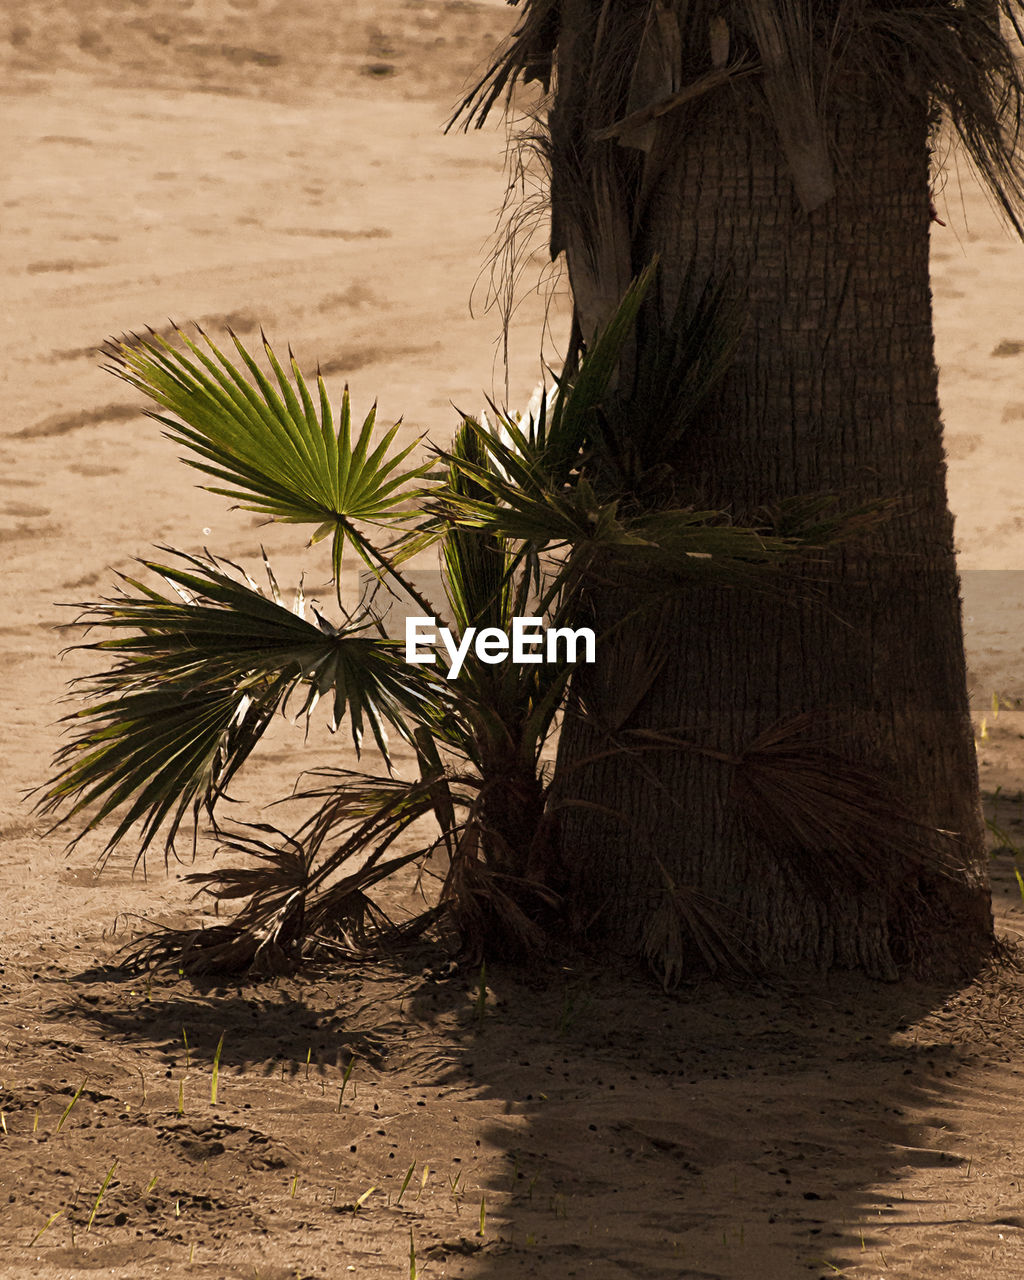 CLOSE-UP OF PALM TREE ON SAND